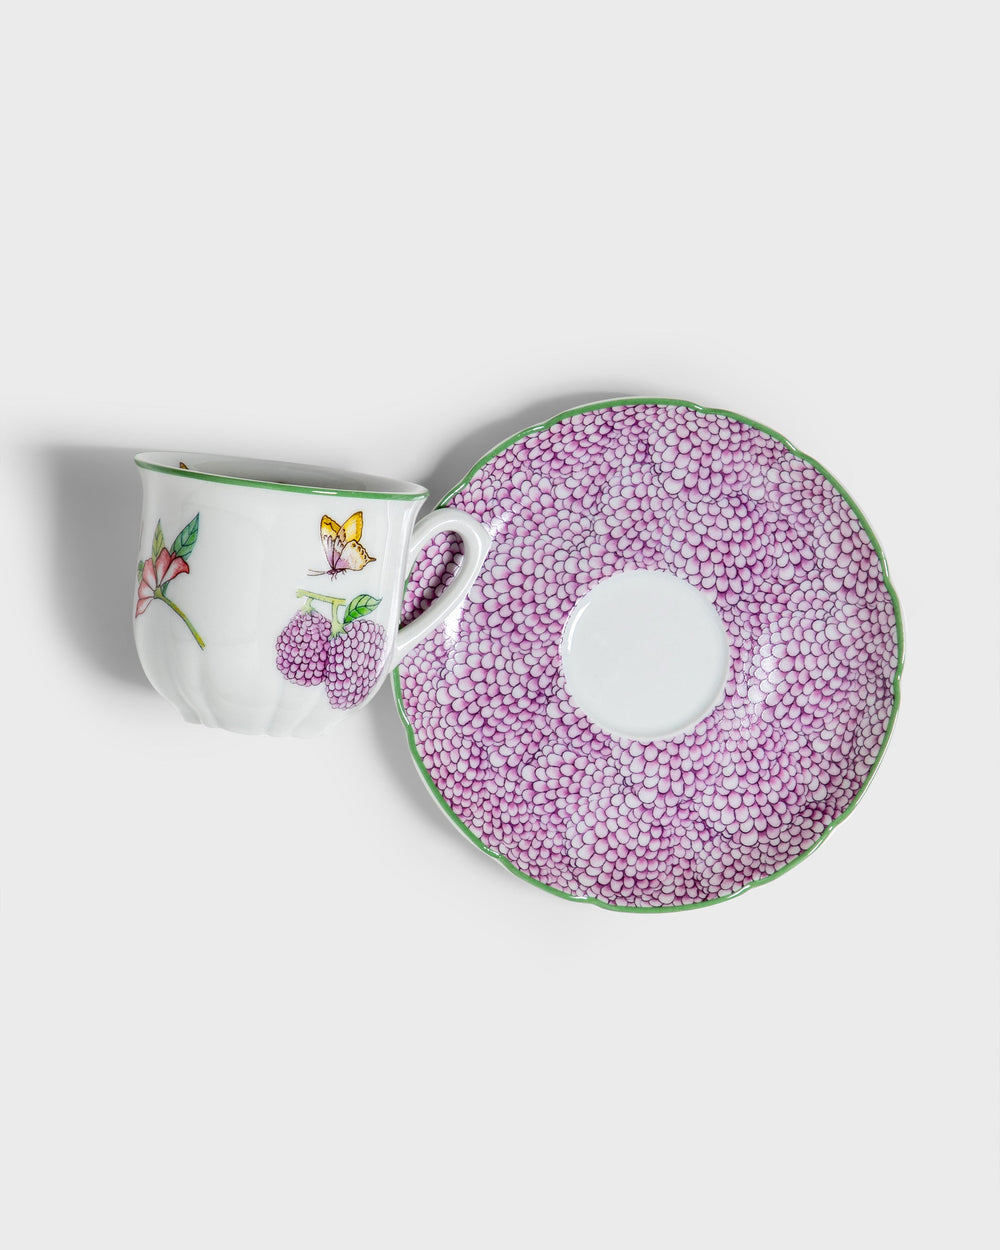 Tania Bulhoes Espresso Cup and Saucer Amora Silvestre